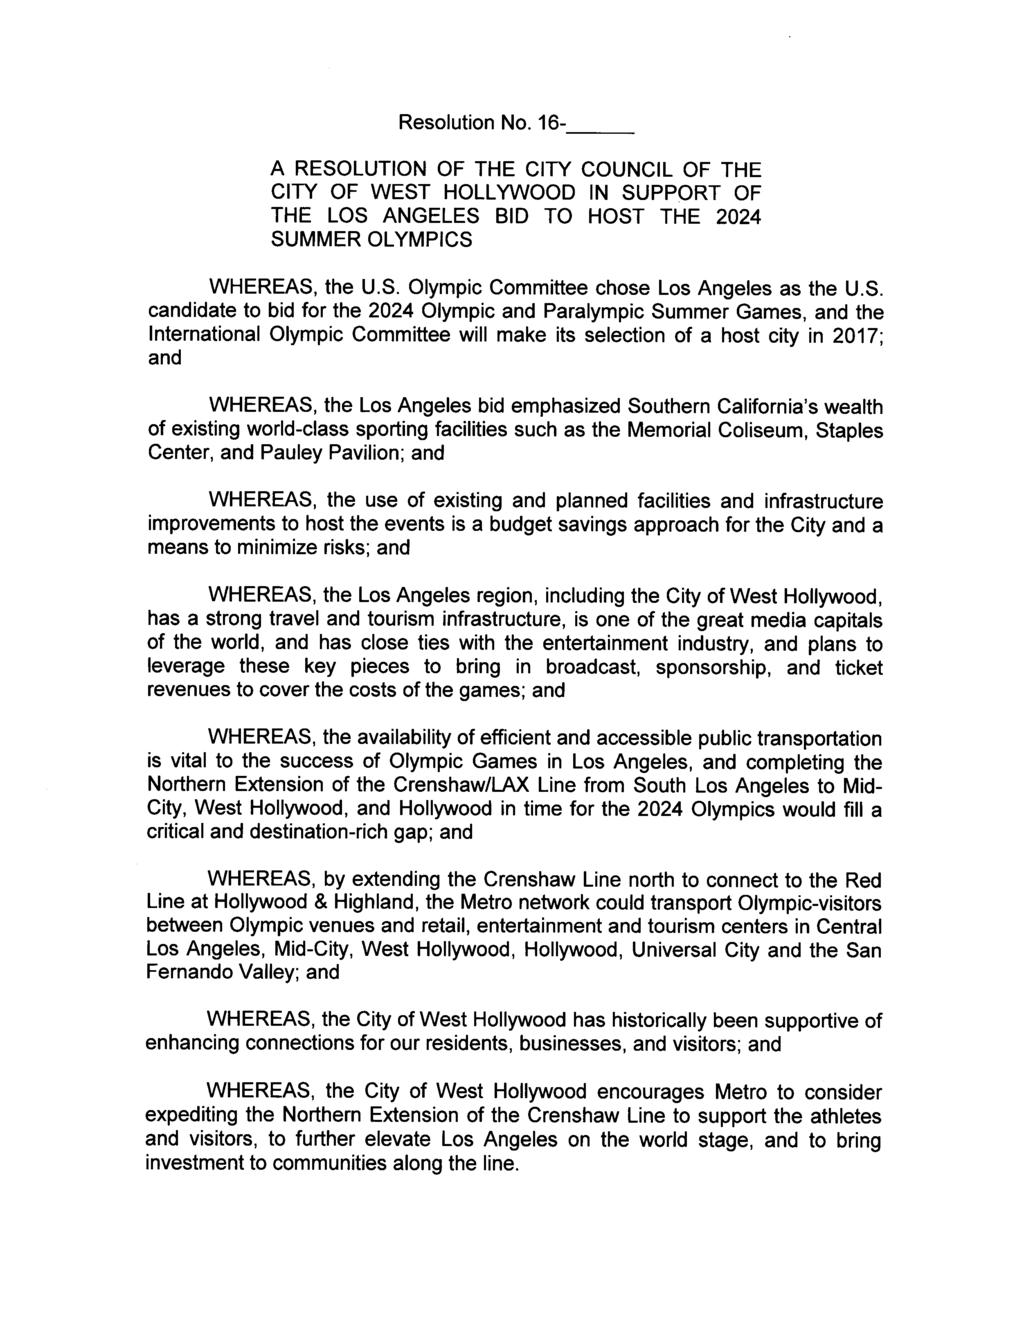 Resolution No. 16- --- A RESOLUTION OF THE CITY COUNCIL OF THE CITY OF WEST HOLLYWOOD IN SUPPORT OF THE LOS ANGELES BID TO HOST THE 2024 SUMMER OLYMPICS WHEREAS, the U.S. Olympic Committee chose Los Angeles as the U.